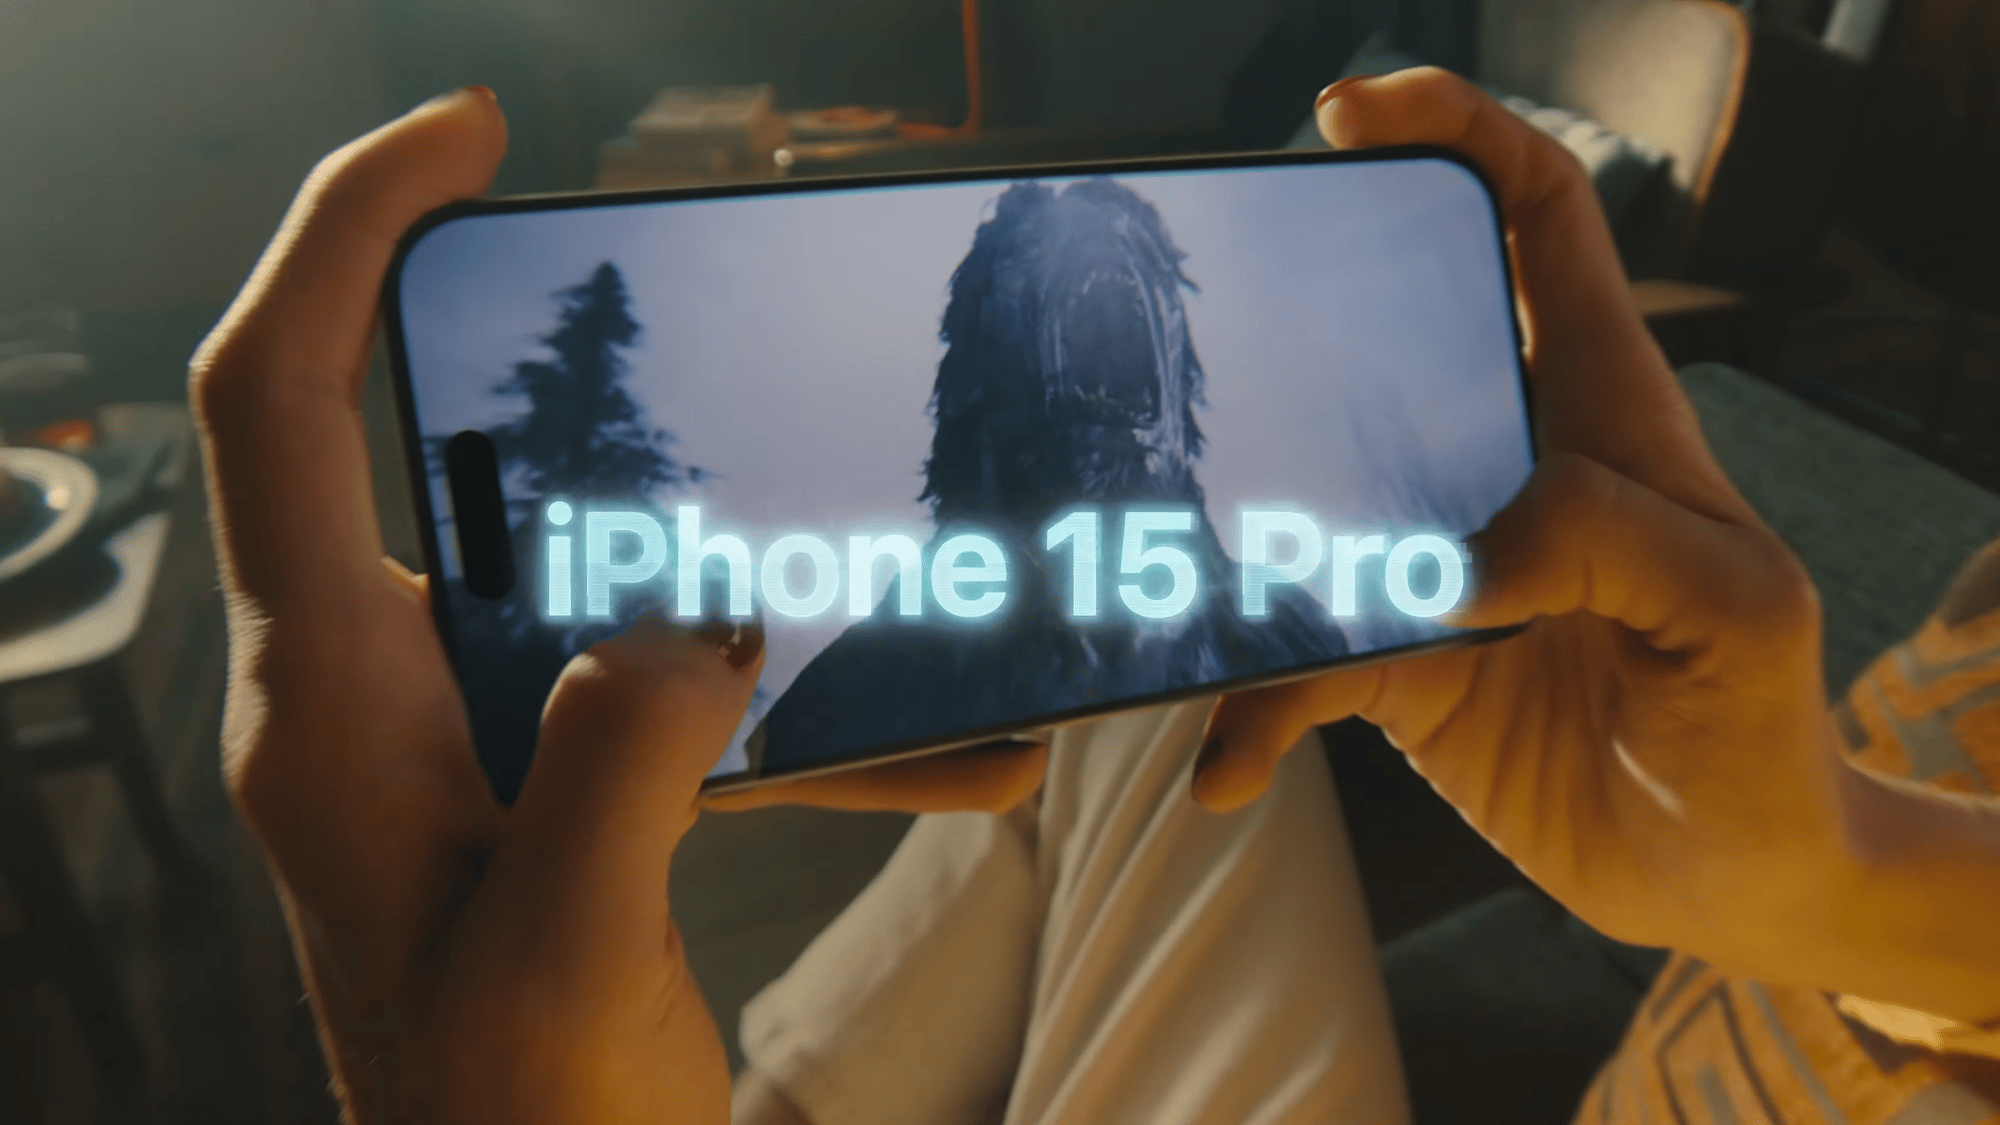 iPhone 15 brings Assassins Creed, Resident Evil, and More to Mobile